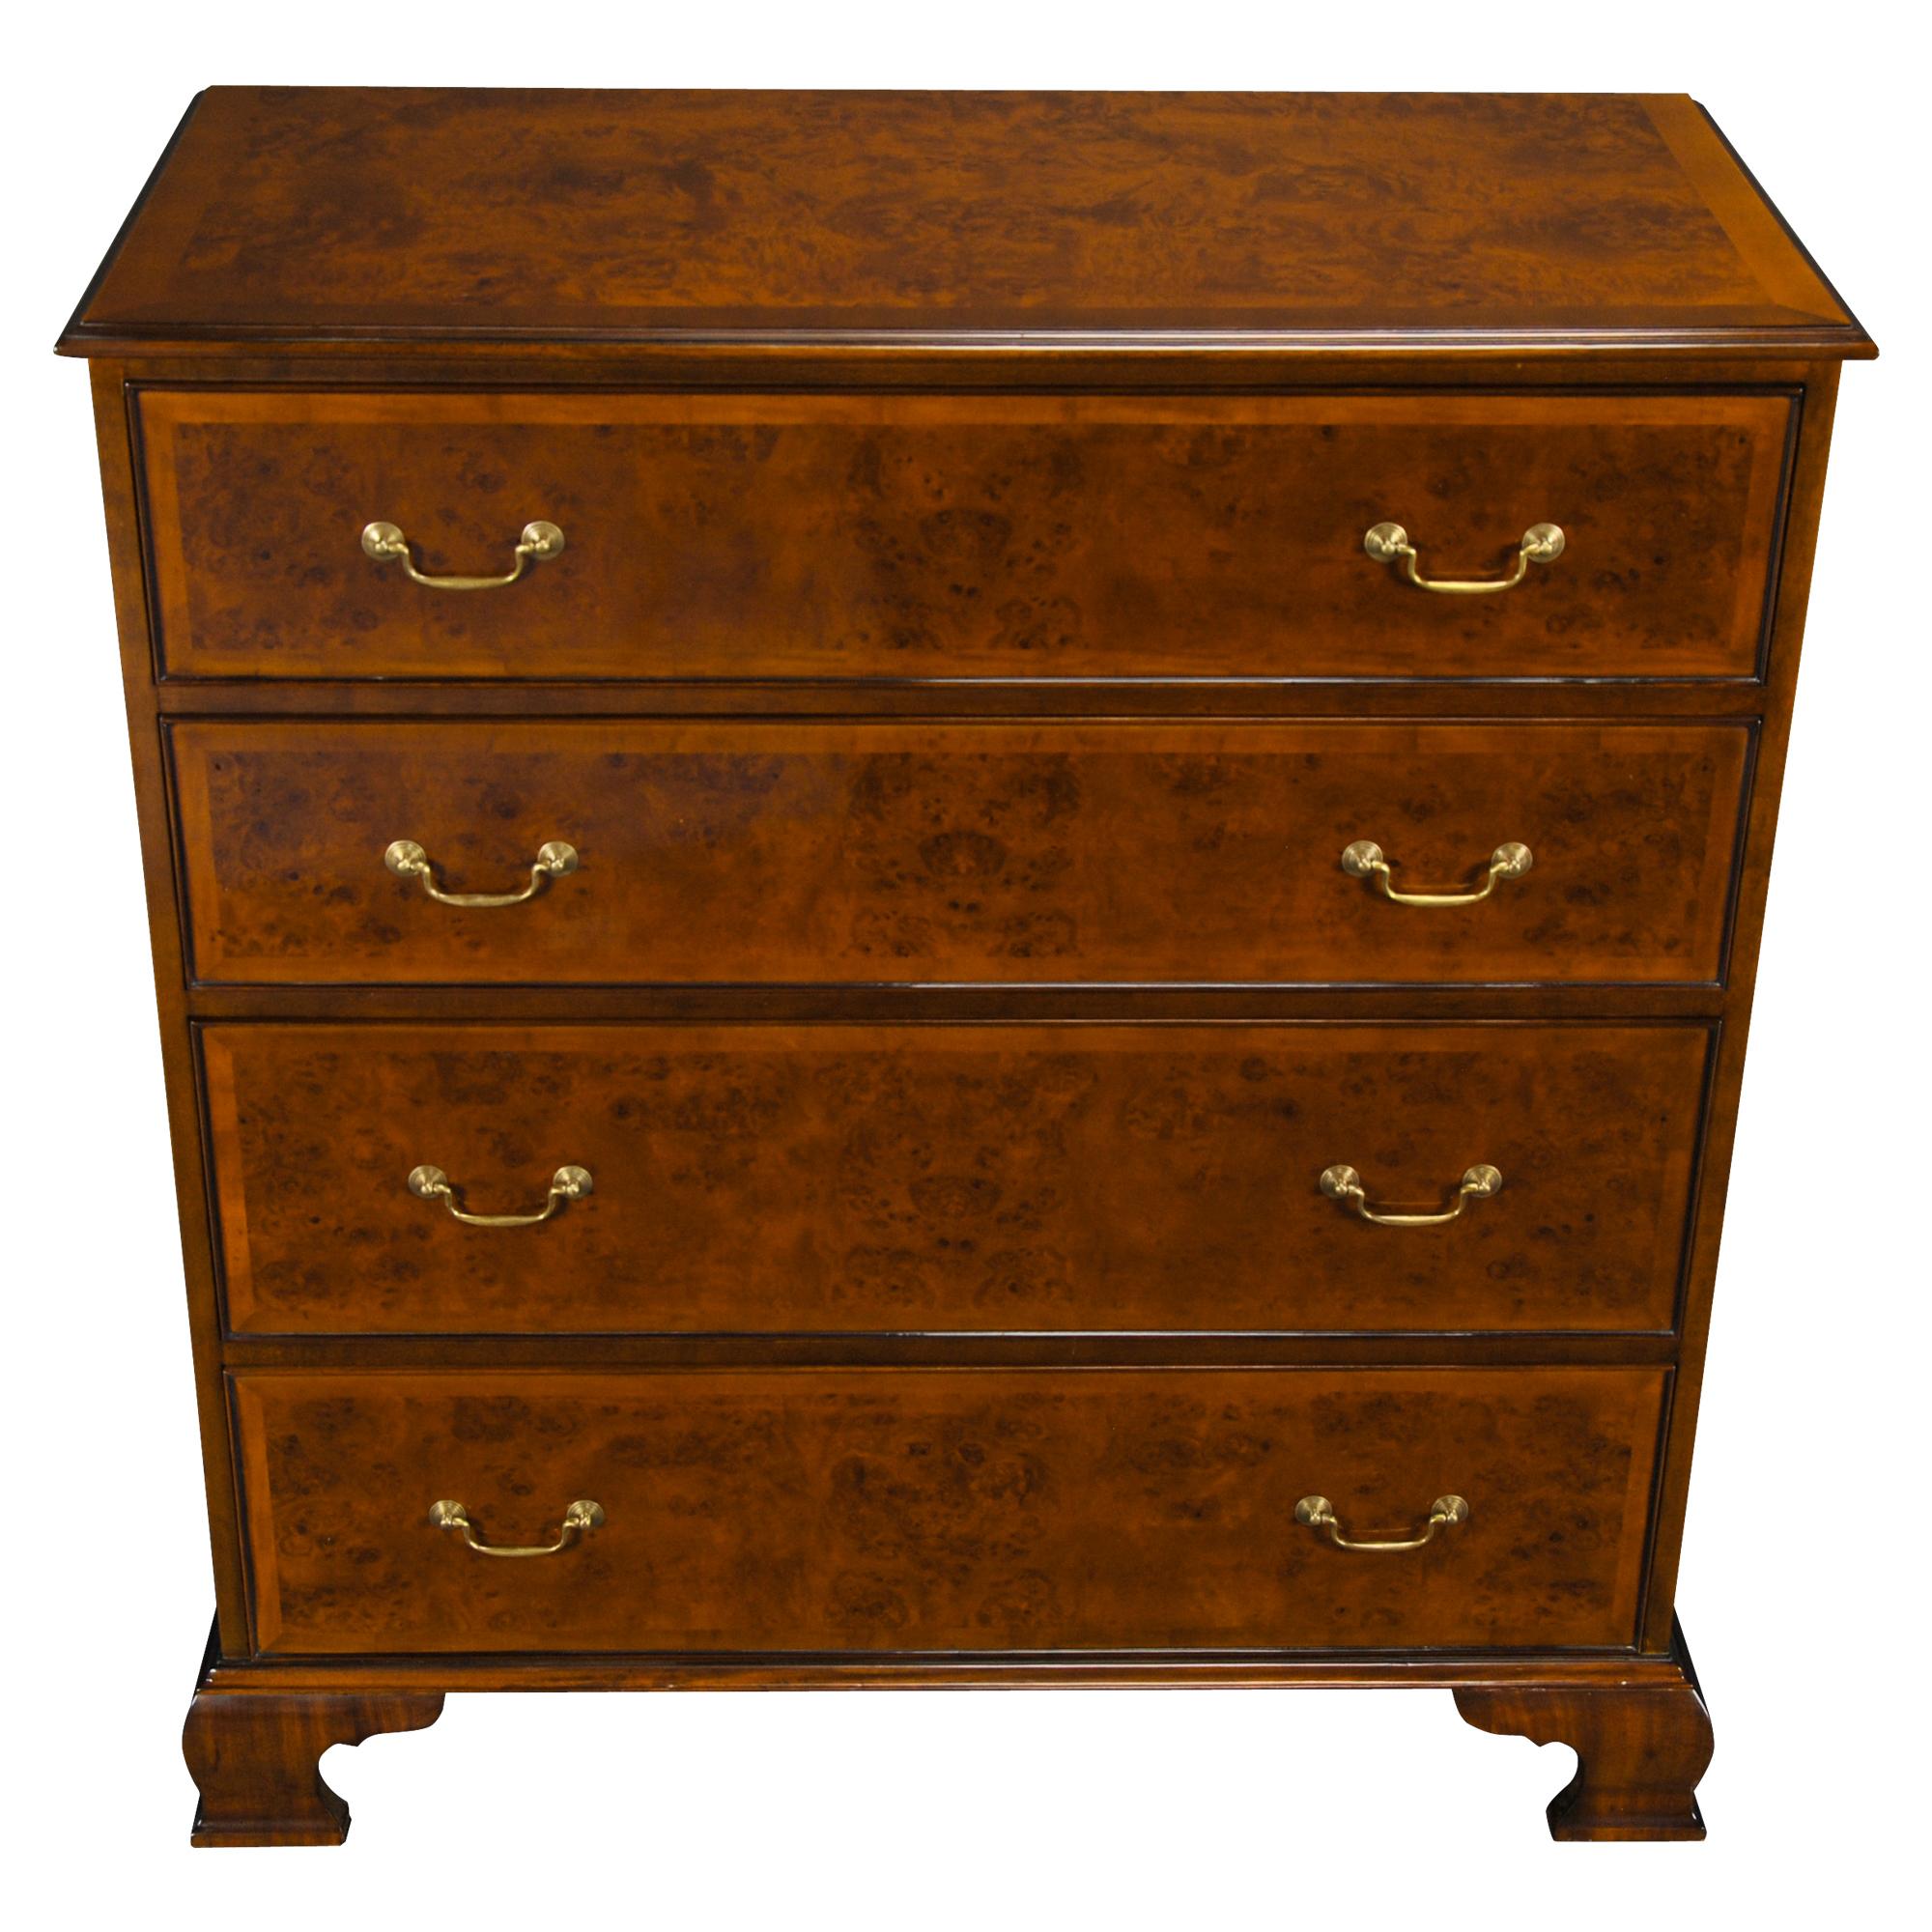 This version of a Tall Burled Dresser, a design inspired form an eighteenth century English chest of drawers. Decorative and functional best describe this high quality tall chest which is a reproduction of an English antique original. Produced using